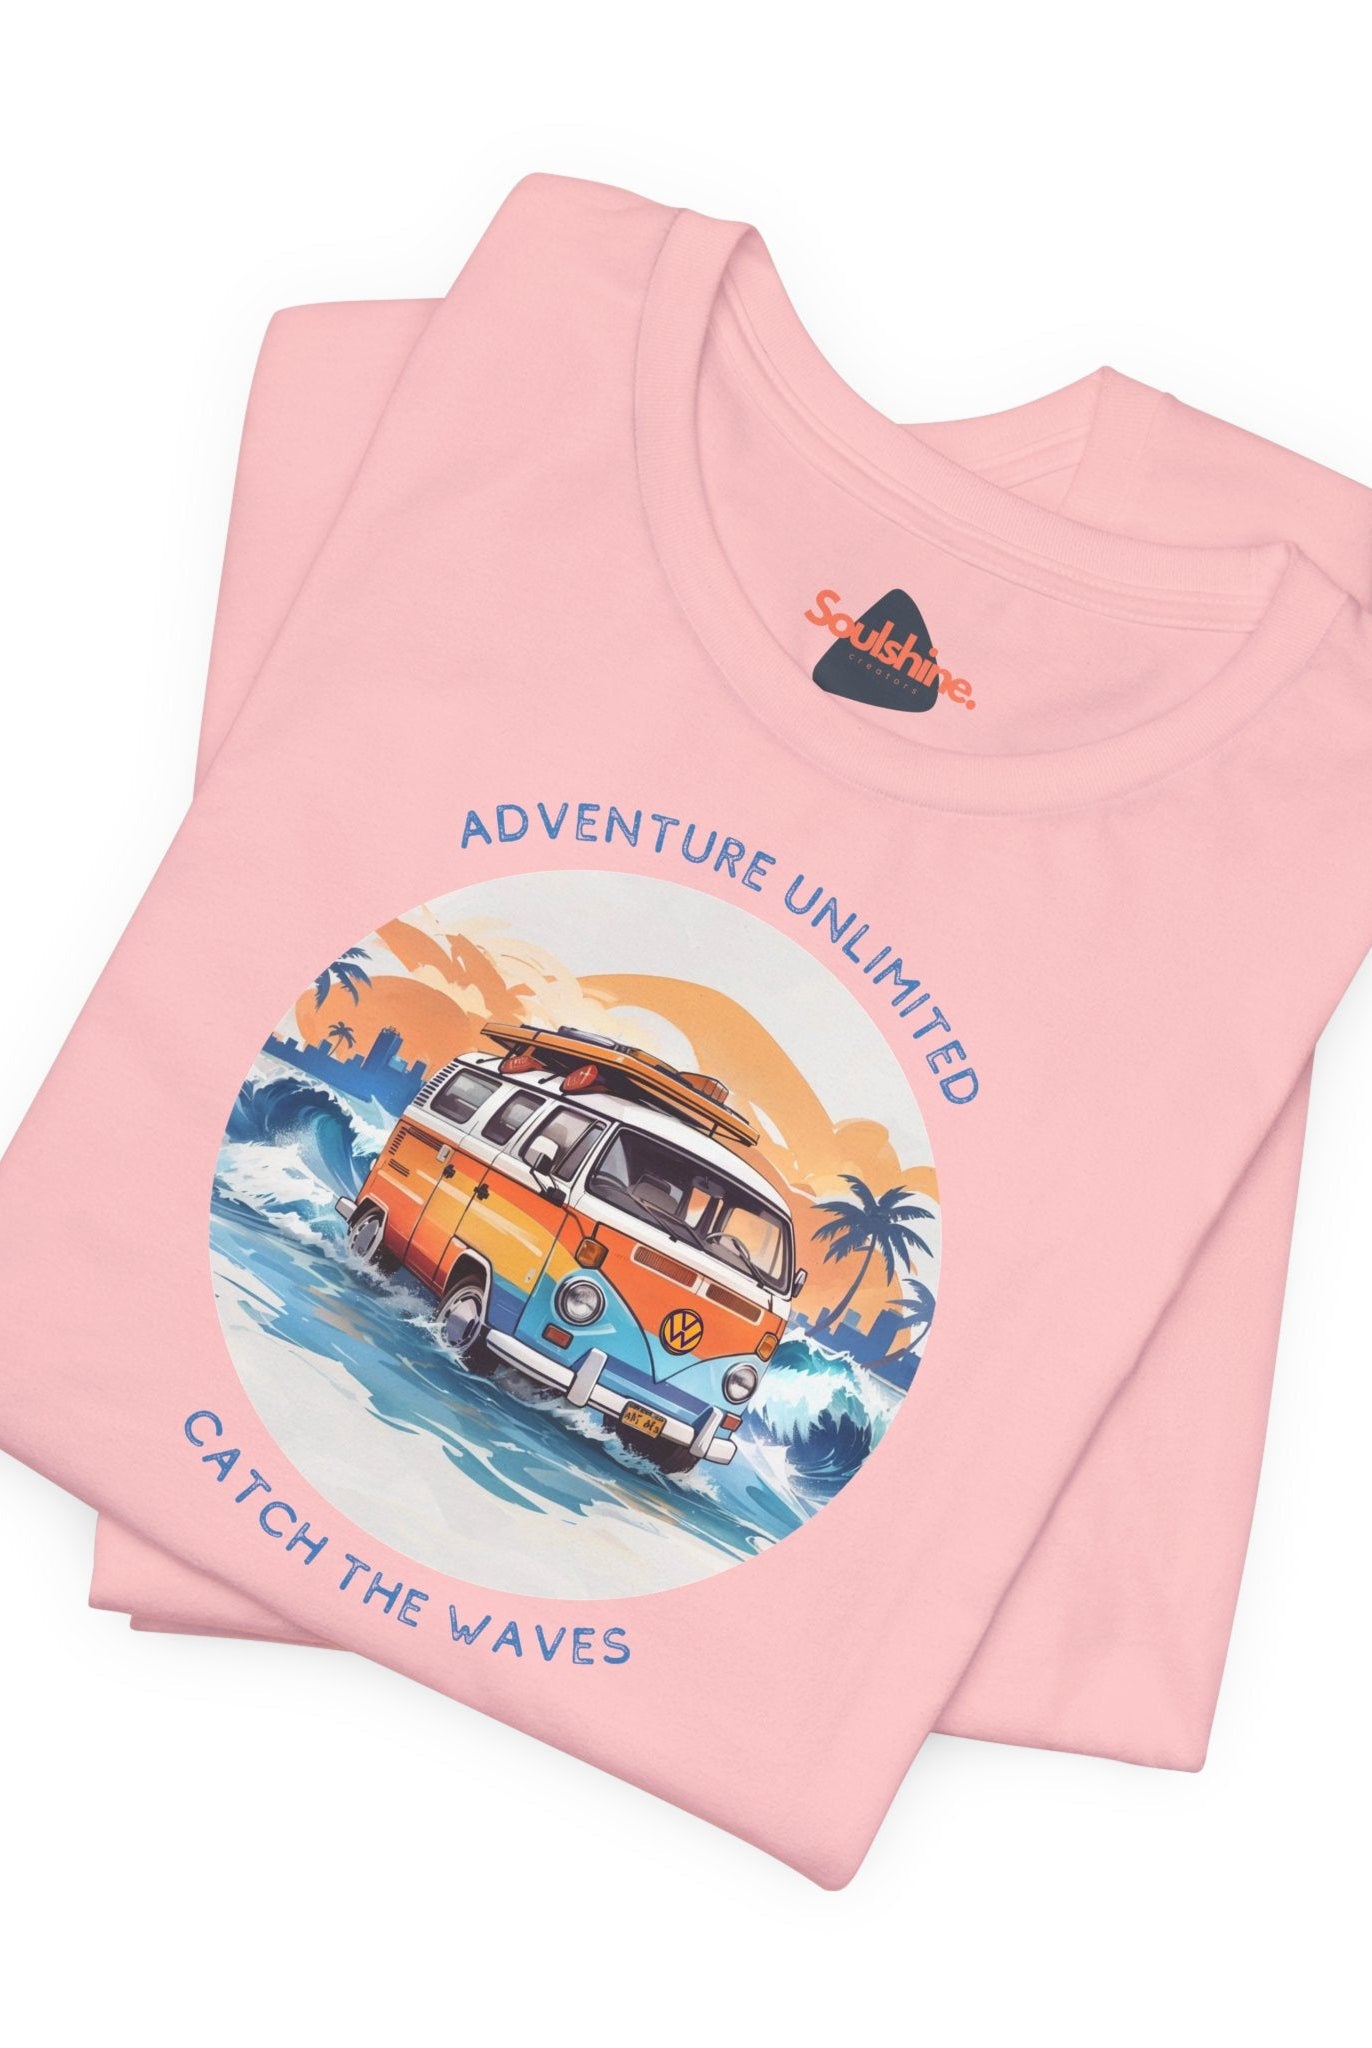 Adventure Unlimited Surfing T-Shirt with Van Driving through Ocean printed on Bella & Canvas shirt